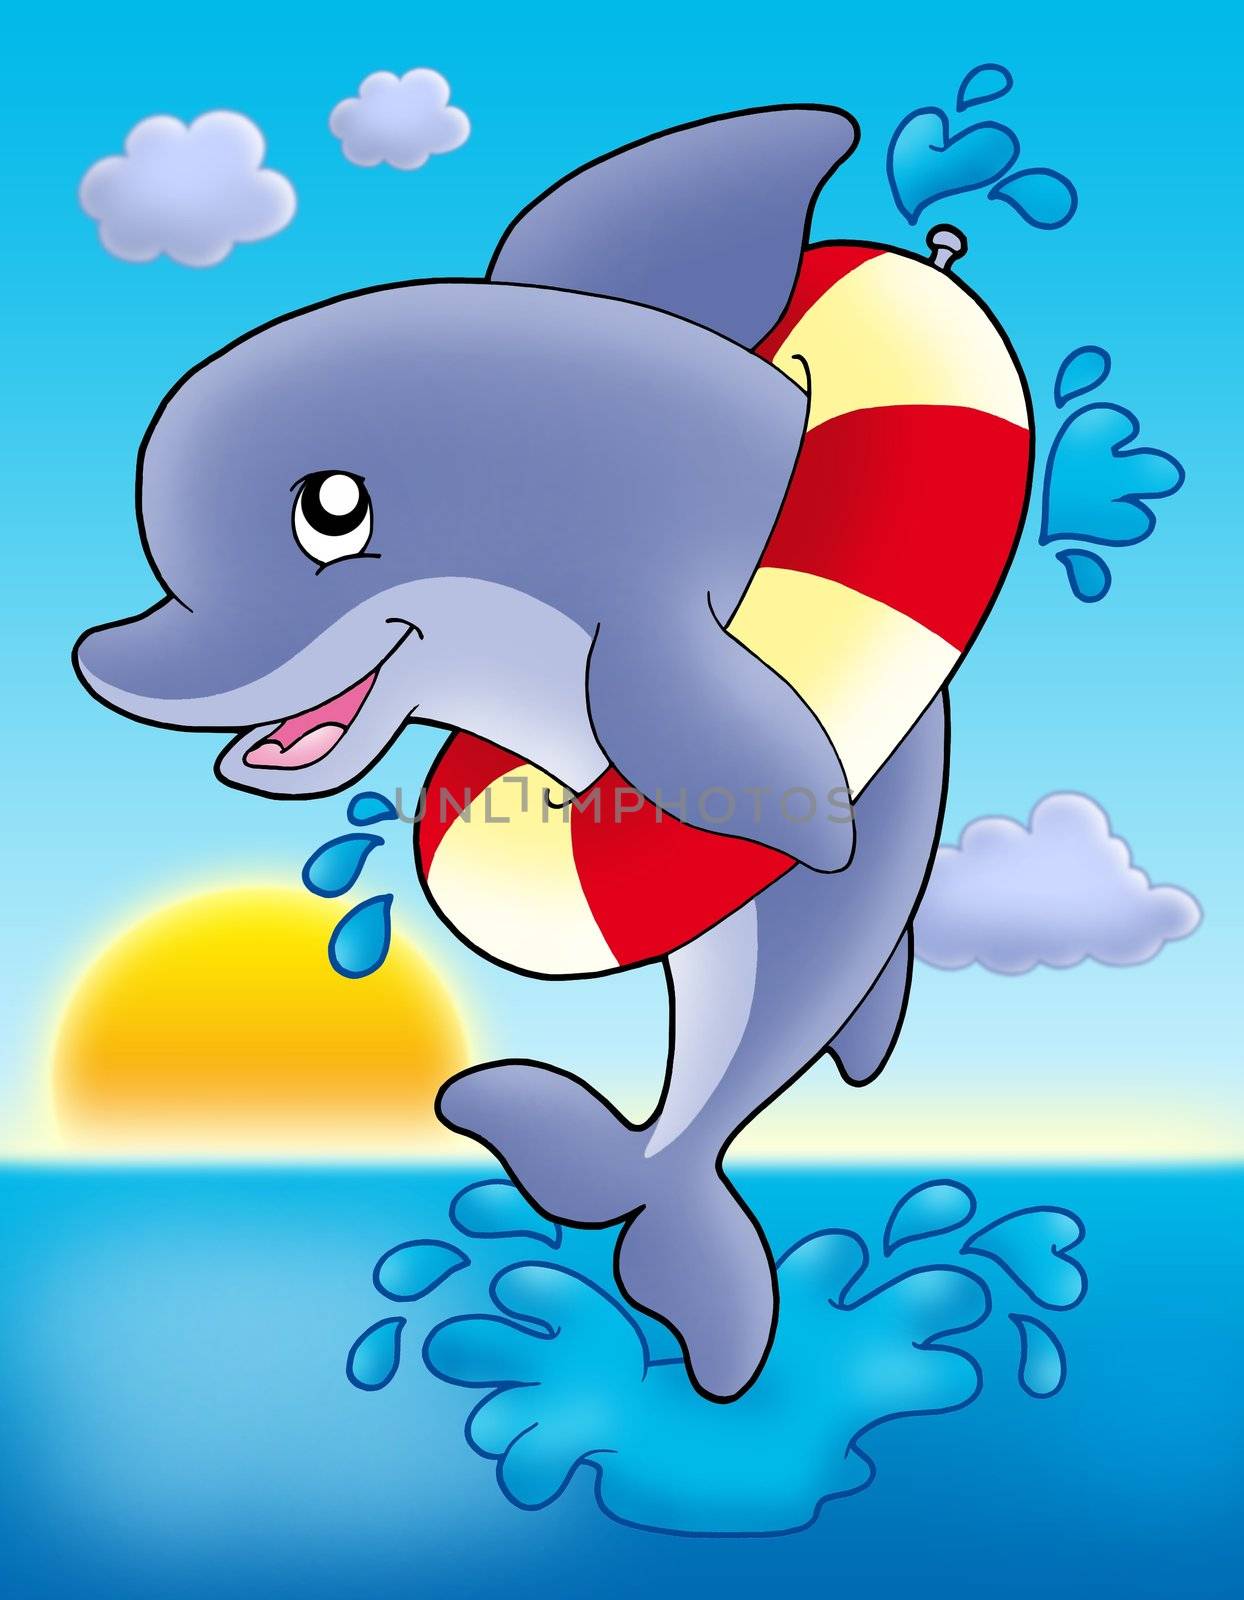 Jumping dolphin with inflatable ring - color illustration.